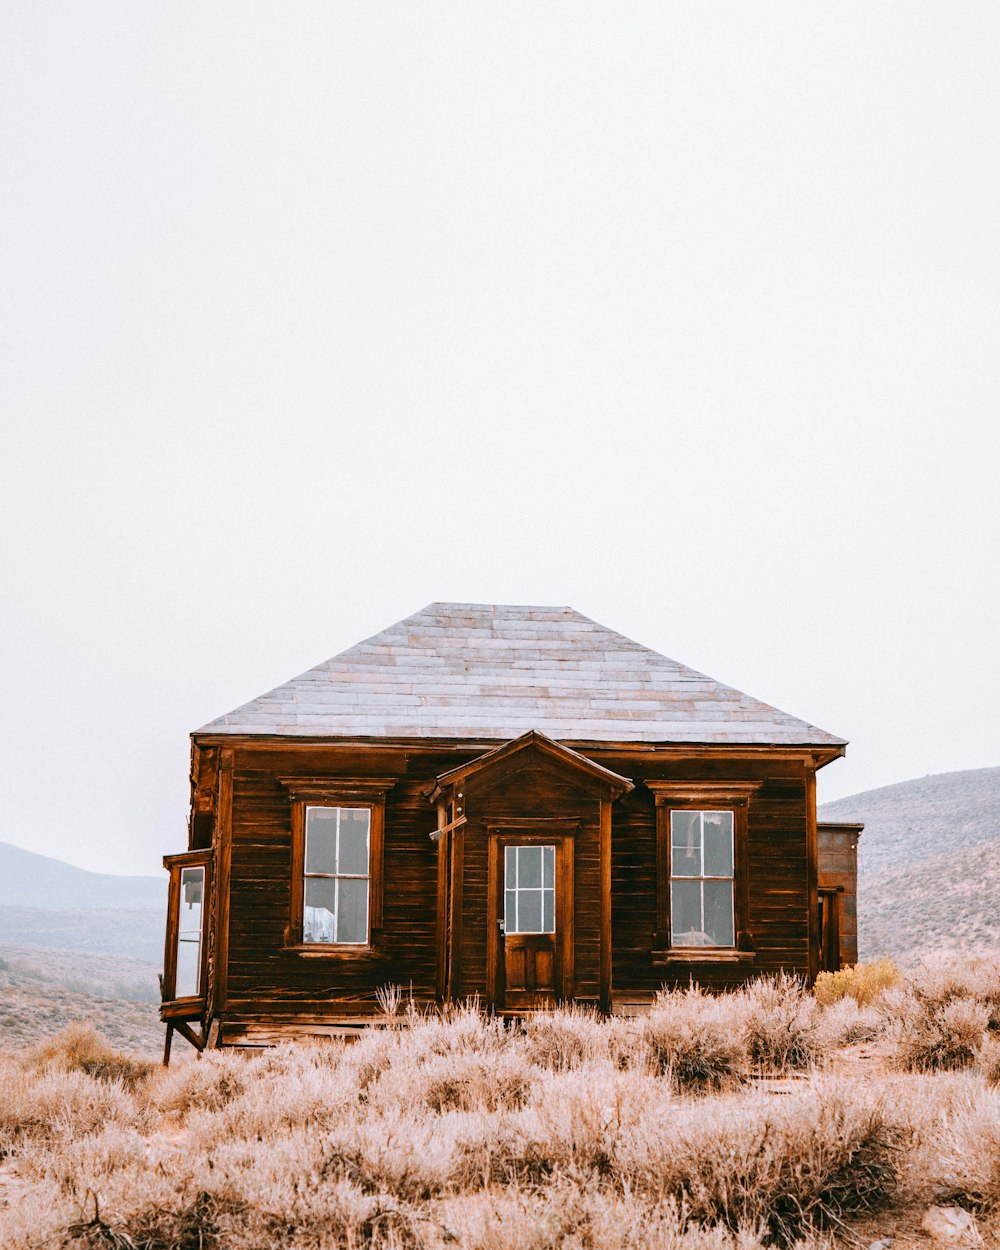 a small wooden house sitting in the middle of a field